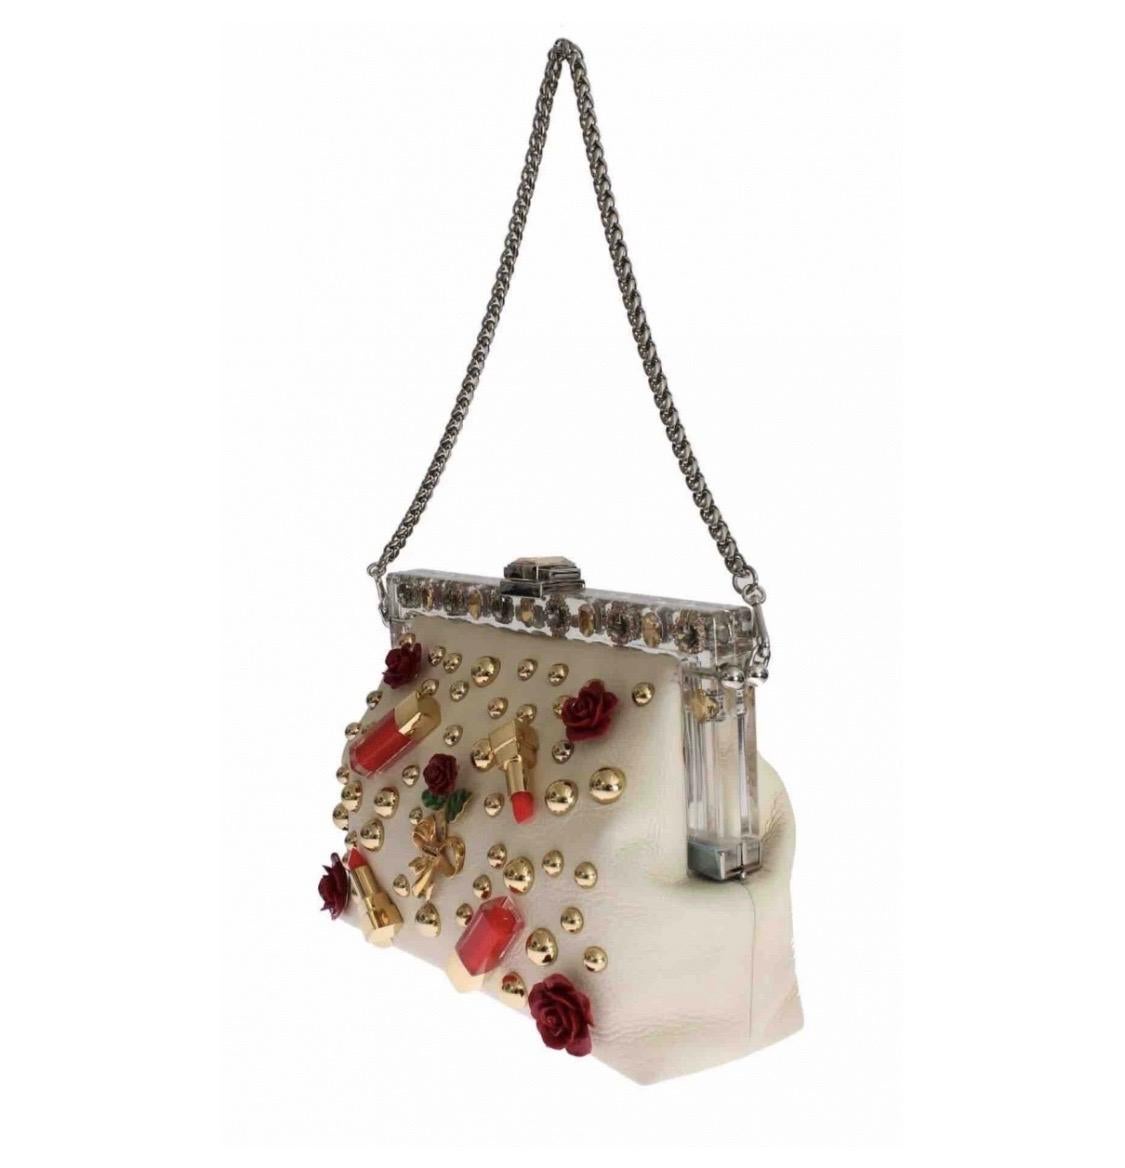 Authentic Dolce & Gabbana in lipstick crystal beige leather and roses adorned with an evening handbag VANDA shoulder clutch. Model: VANDA bag Material: 100% leather Color: beige with metal details silver and gold Crystal: transparent and champagne